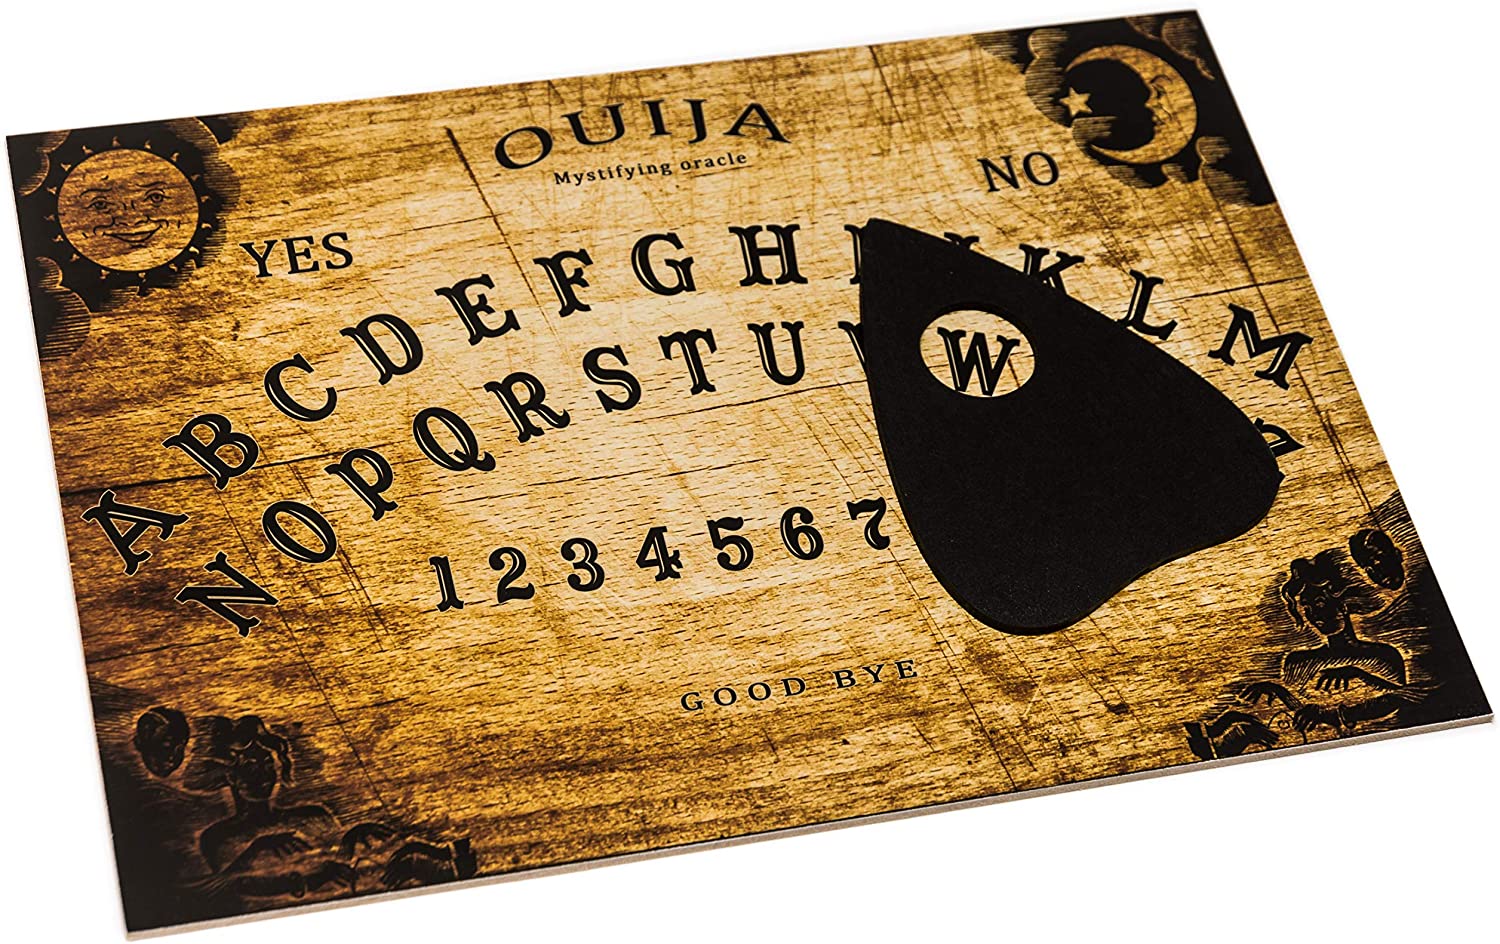 WICCSTAR Ouija Board game with Planchette and detailed instruction for Spirit Hu 